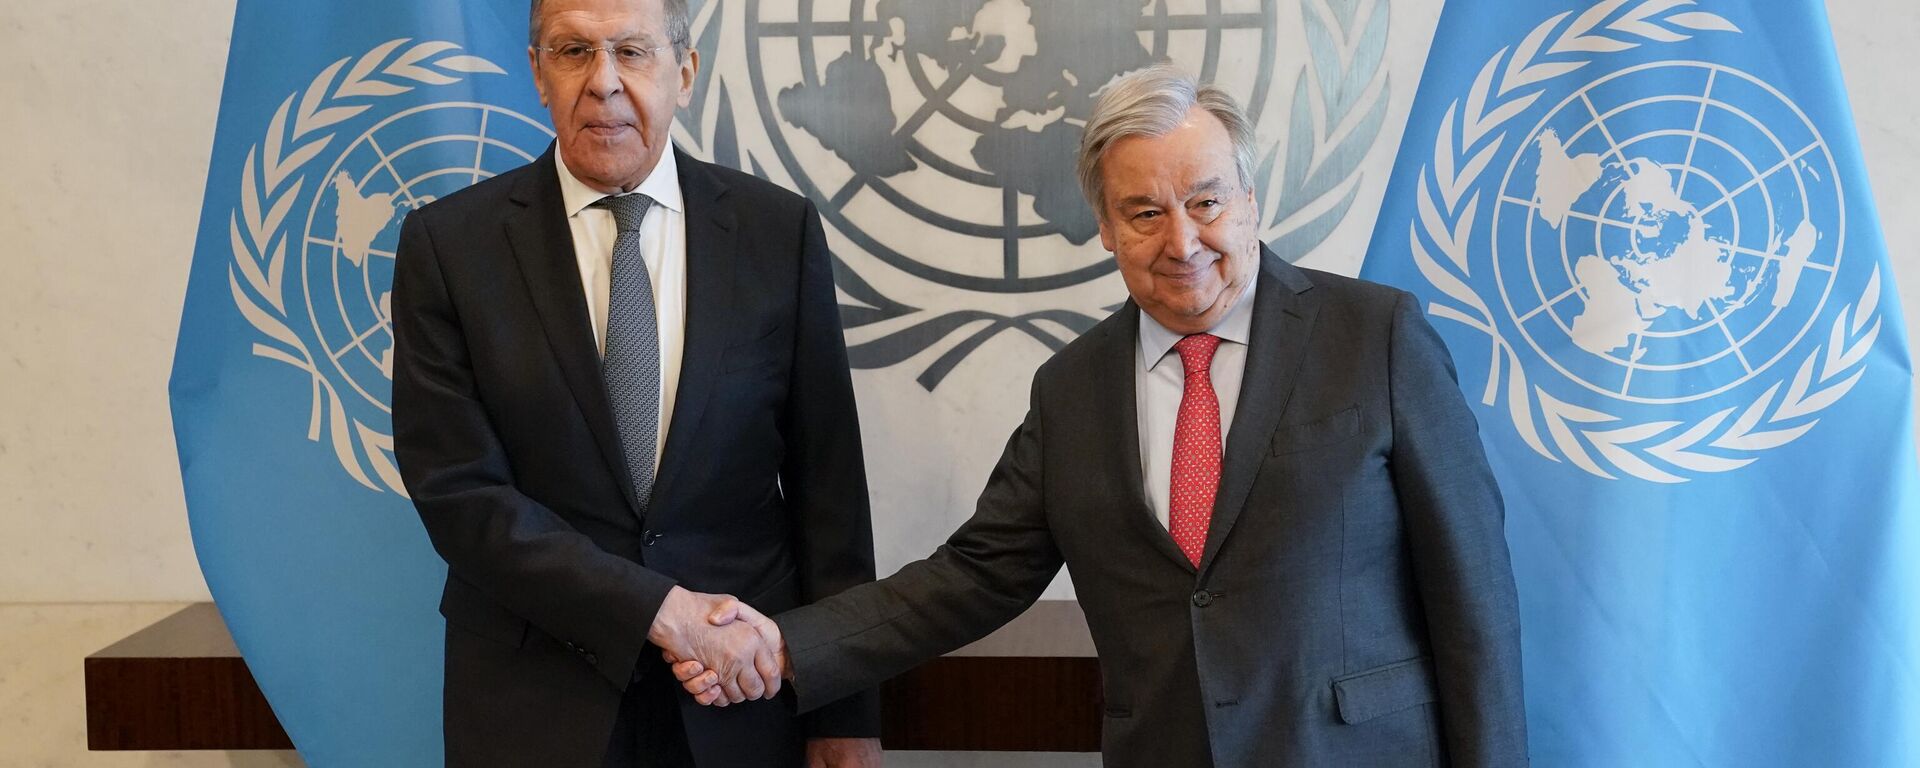 Antonio Guterres, United Nations Secretary General, right, and Sergey Lavrov, Russia's Minister for Foreign Affairs, current president of the Security Council, shake hands at the top of a meeting at the secretariat offices, Monday, April 24, 2023, at United Nations headquarters. - Sputnik Africa, 1920, 25.04.2023